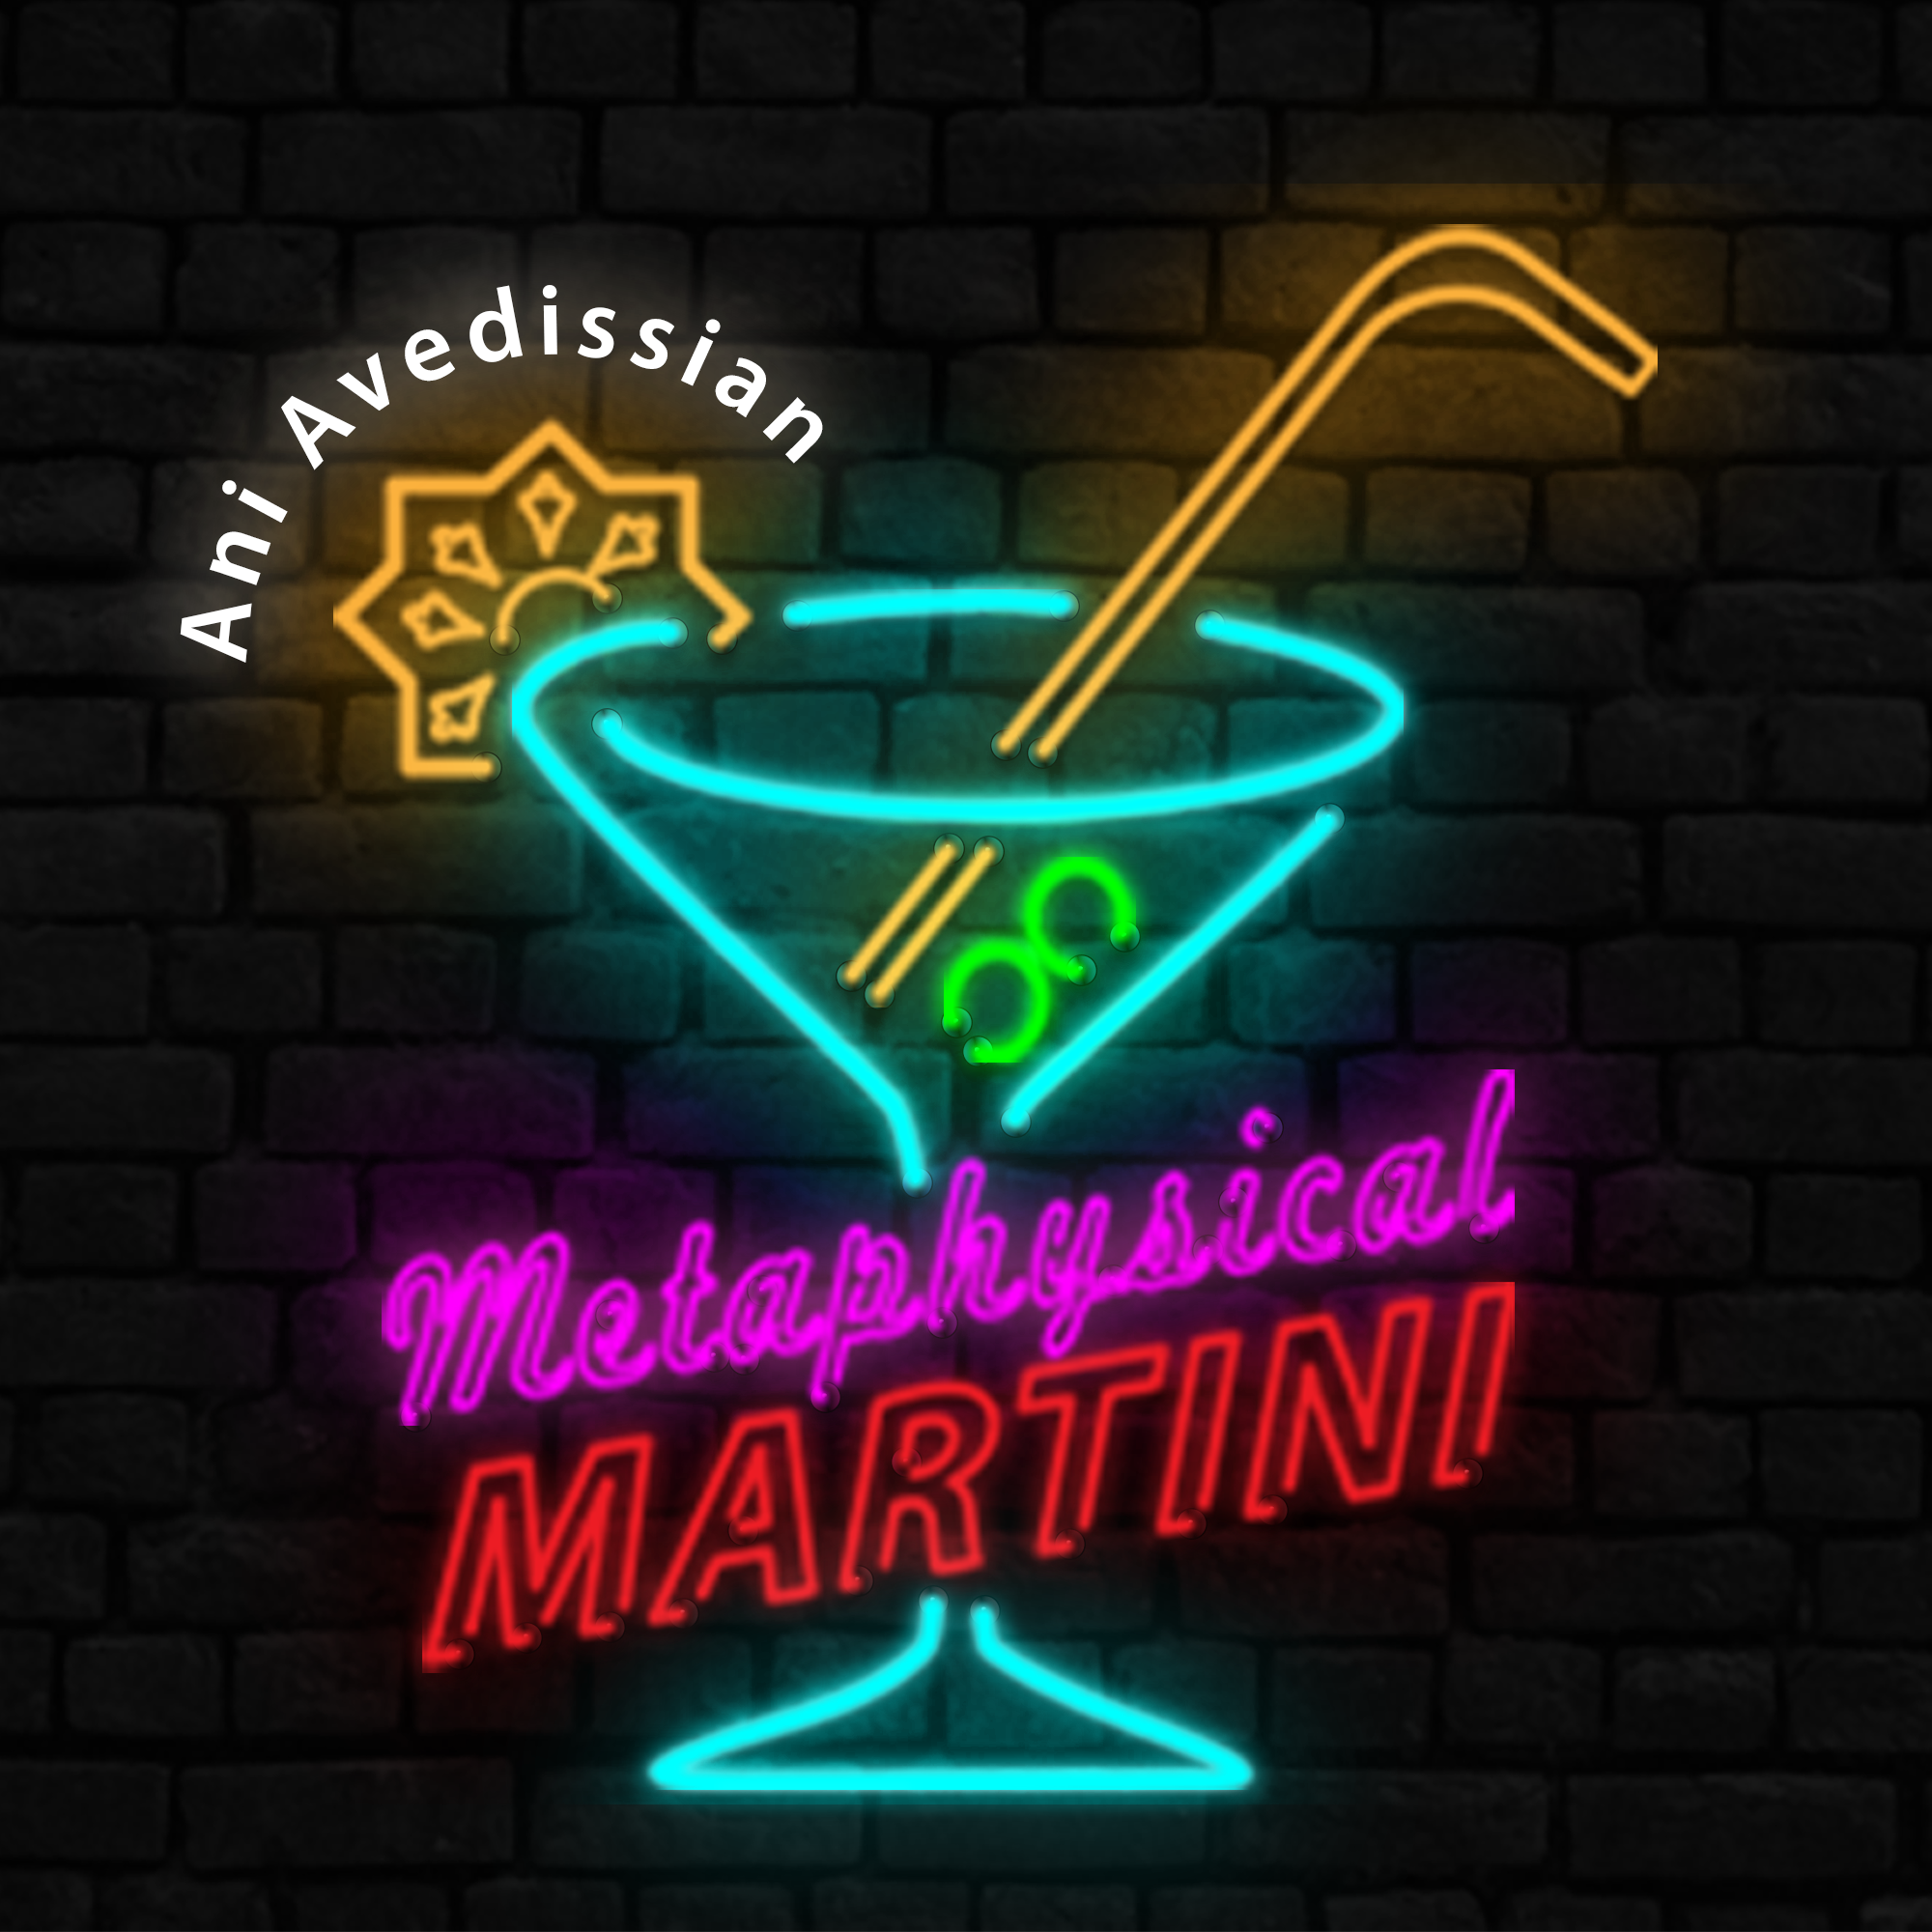 "Metaphysical Martini" 07/10/2019   Ani's first "Martini!" She hopes it will go well . . .